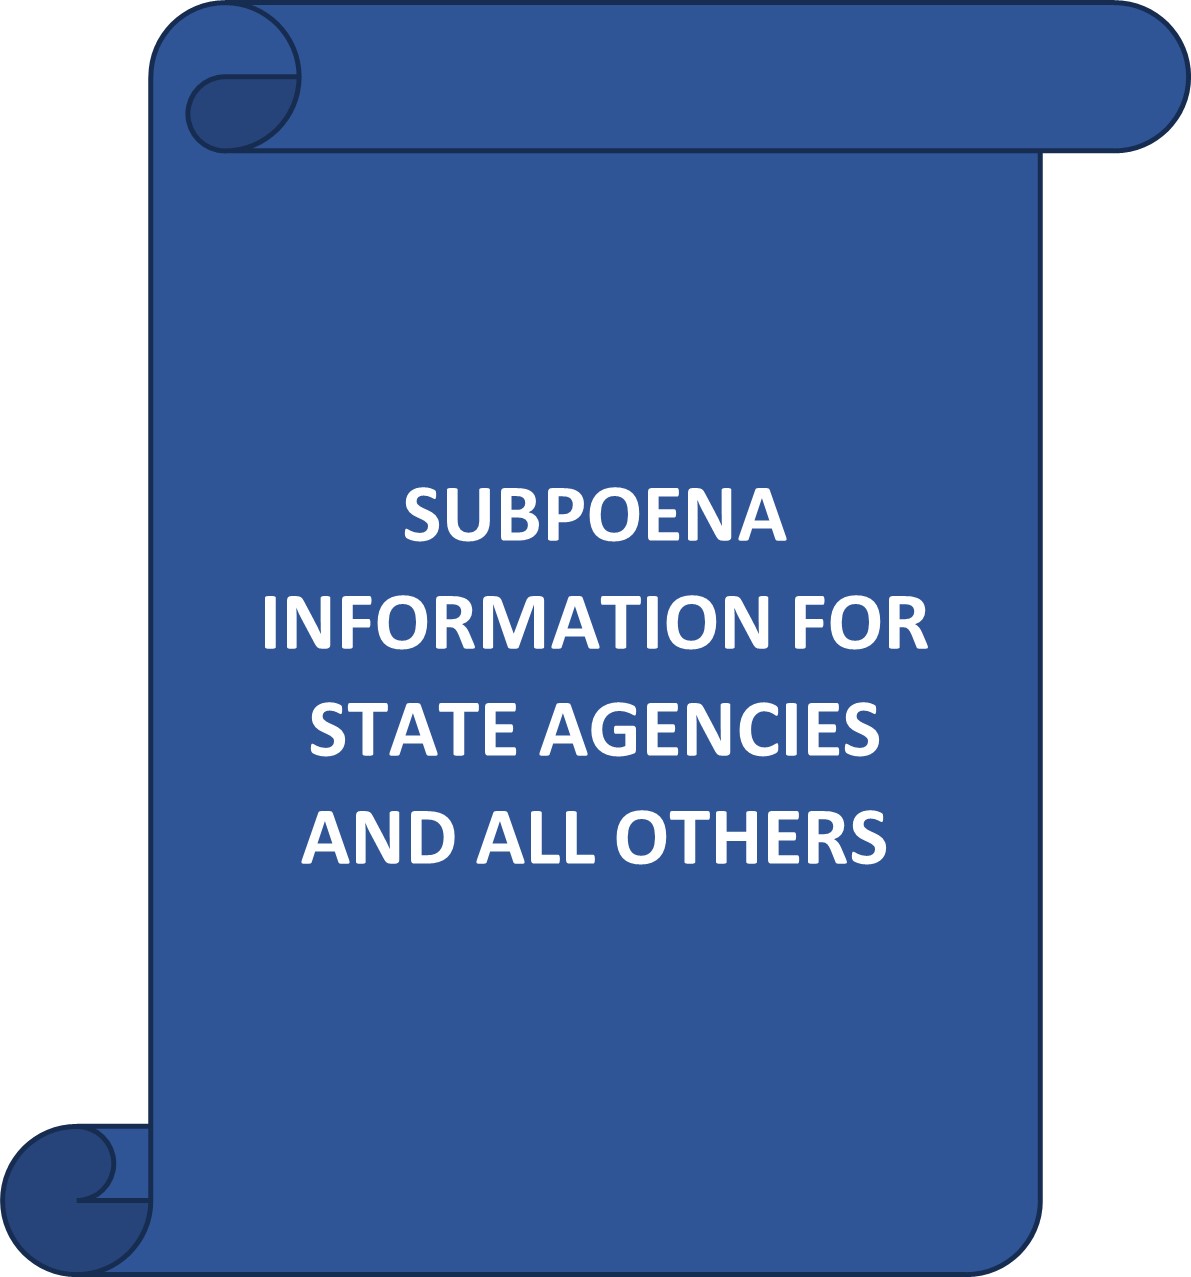 This graphic provides a link to requesting subpoenas for state employees and investigators